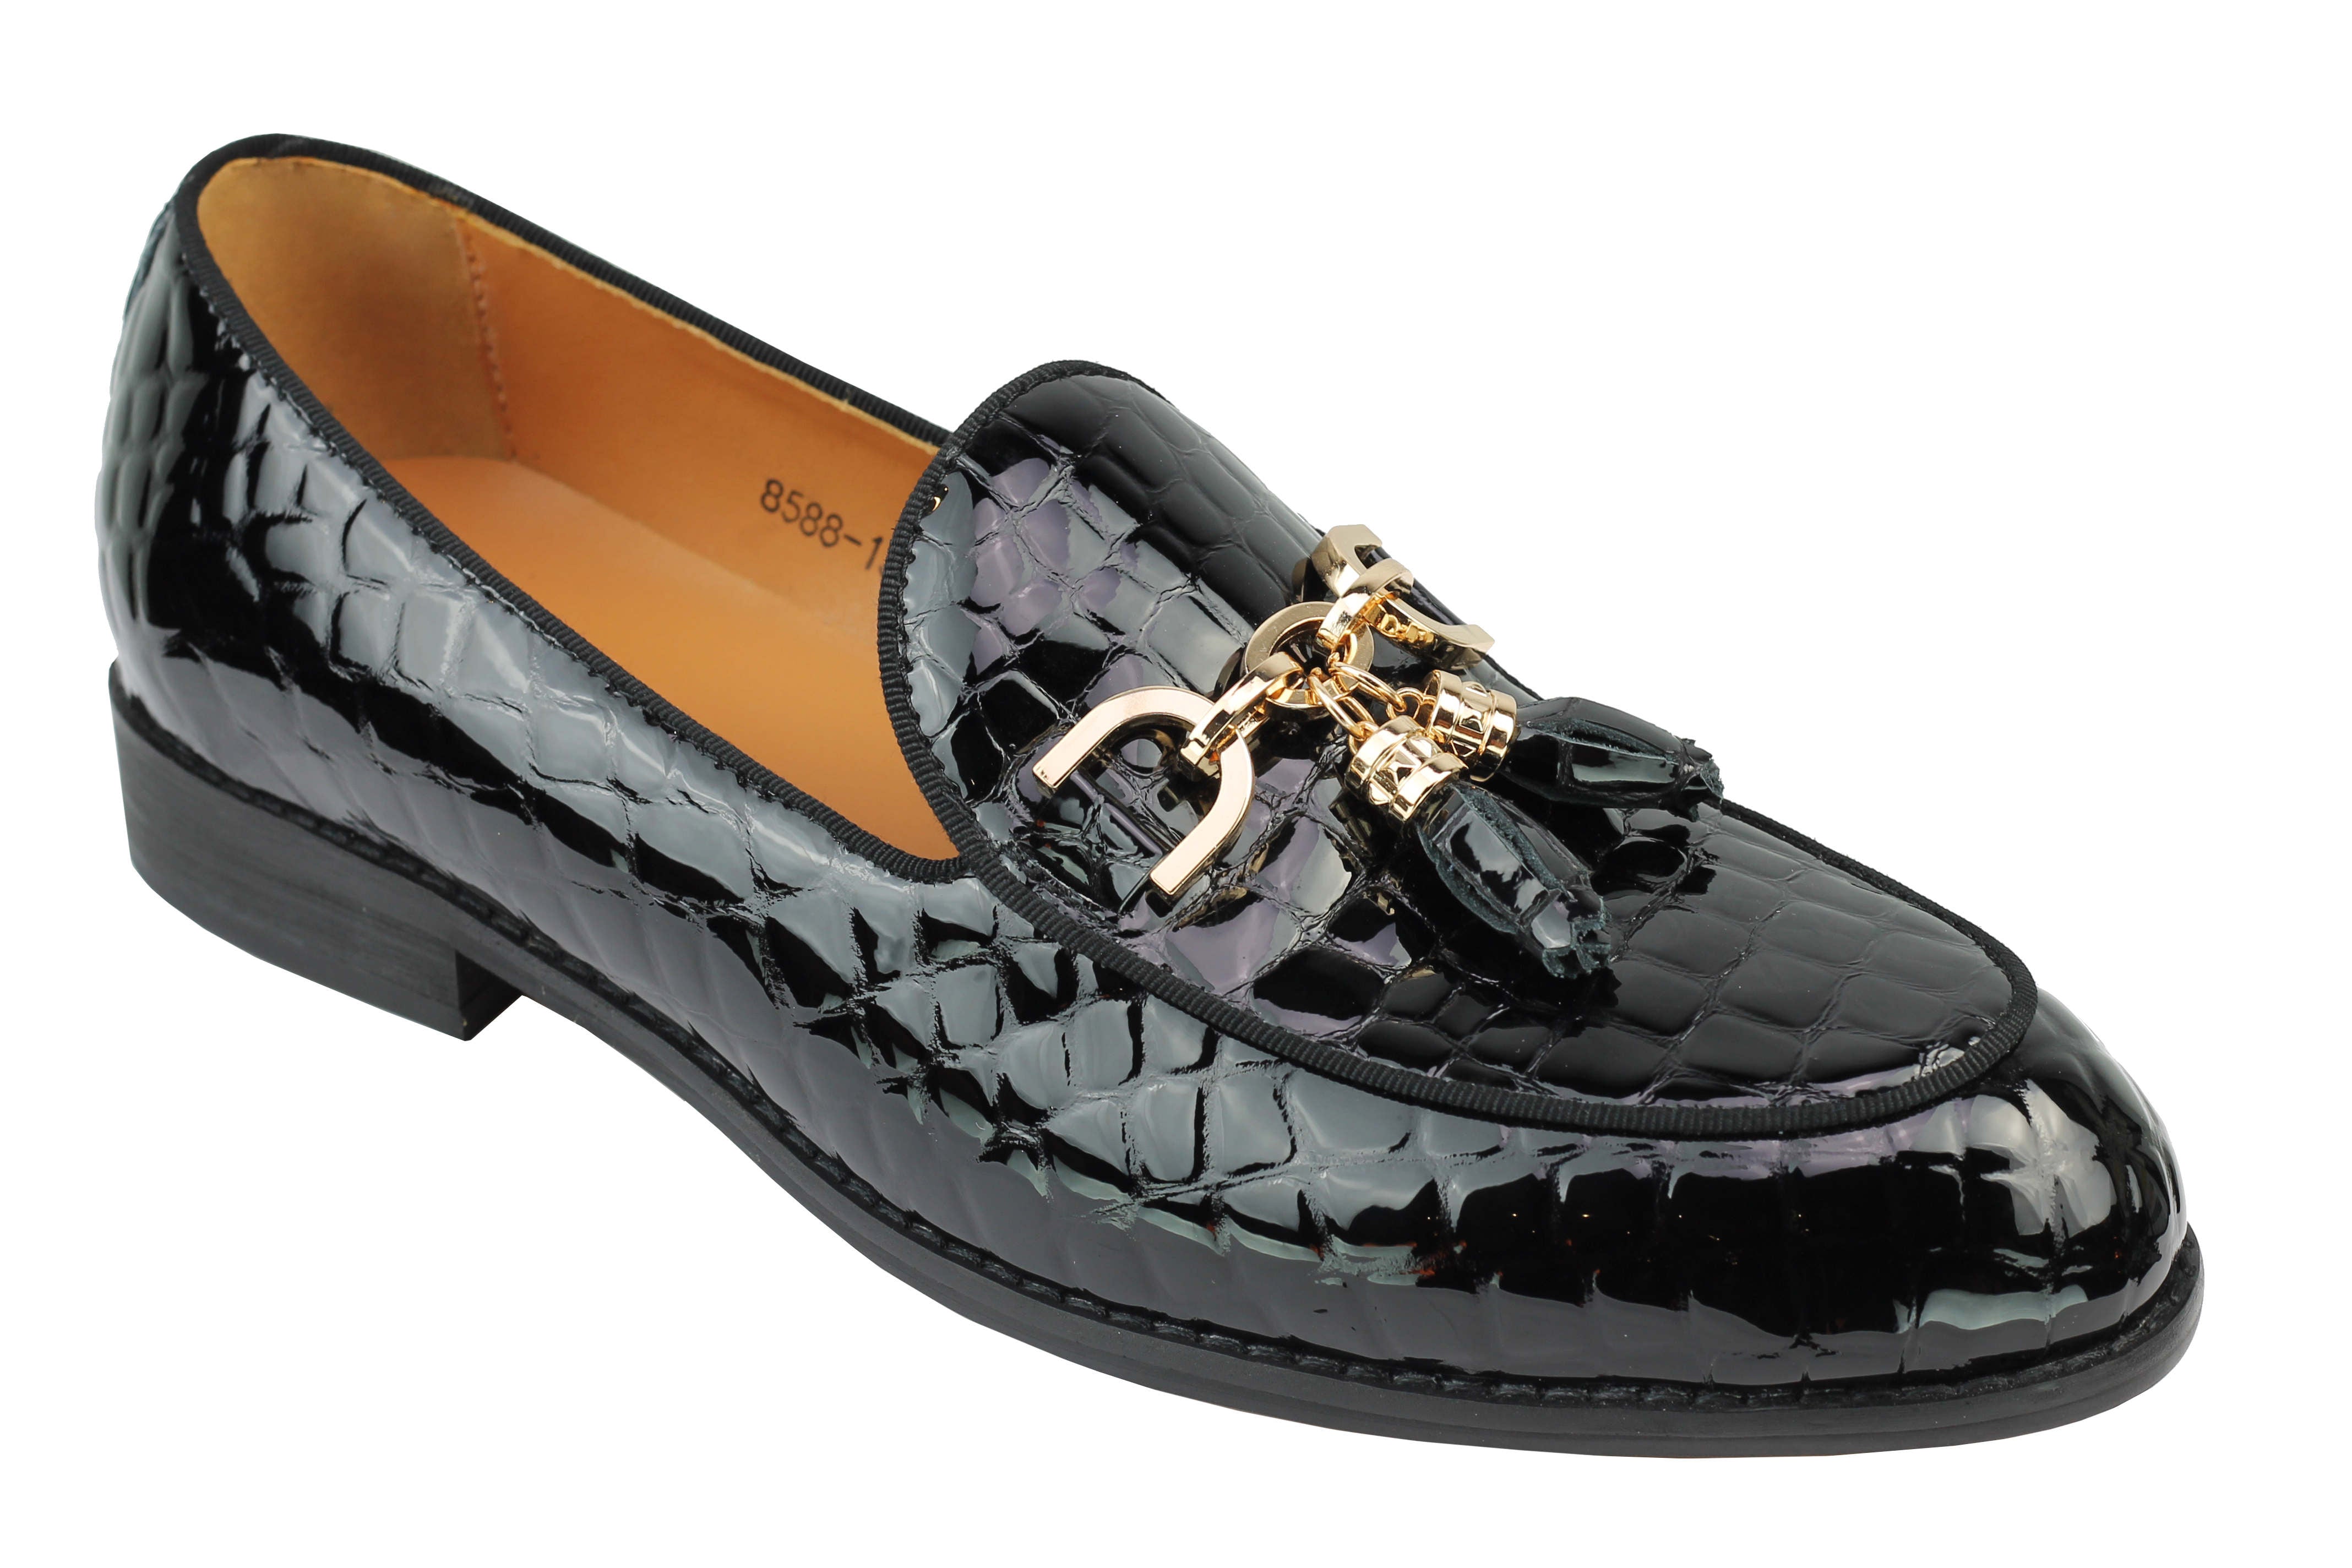 Real Leather Glossy Snake Print Tassel Loafers